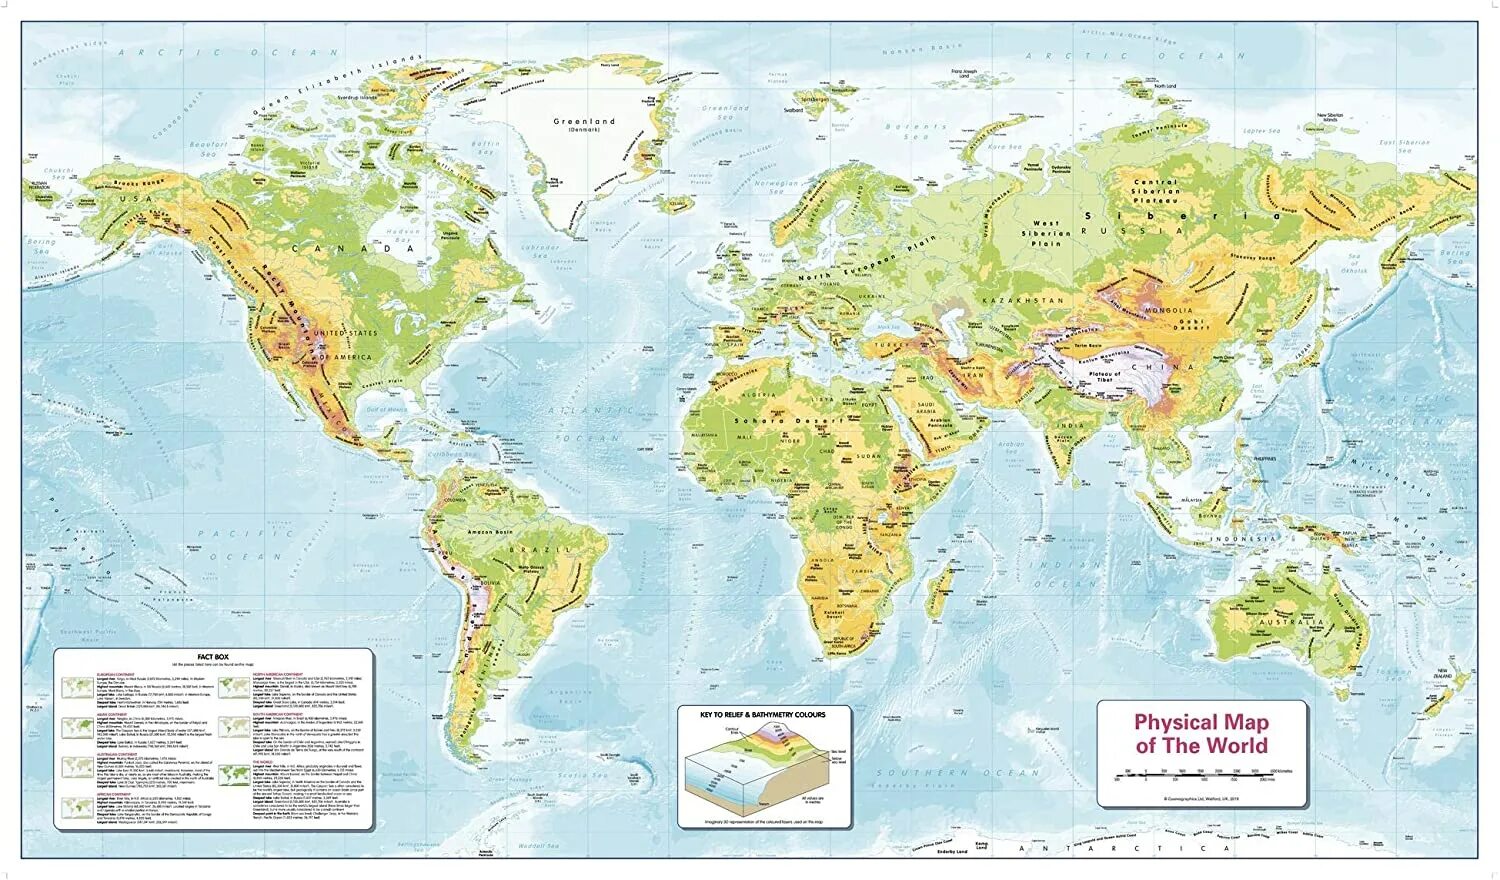 Small map. Physical Map of the World. Mountain Map World. Physical Map of the World დრაწინგ. Physic Map of World.